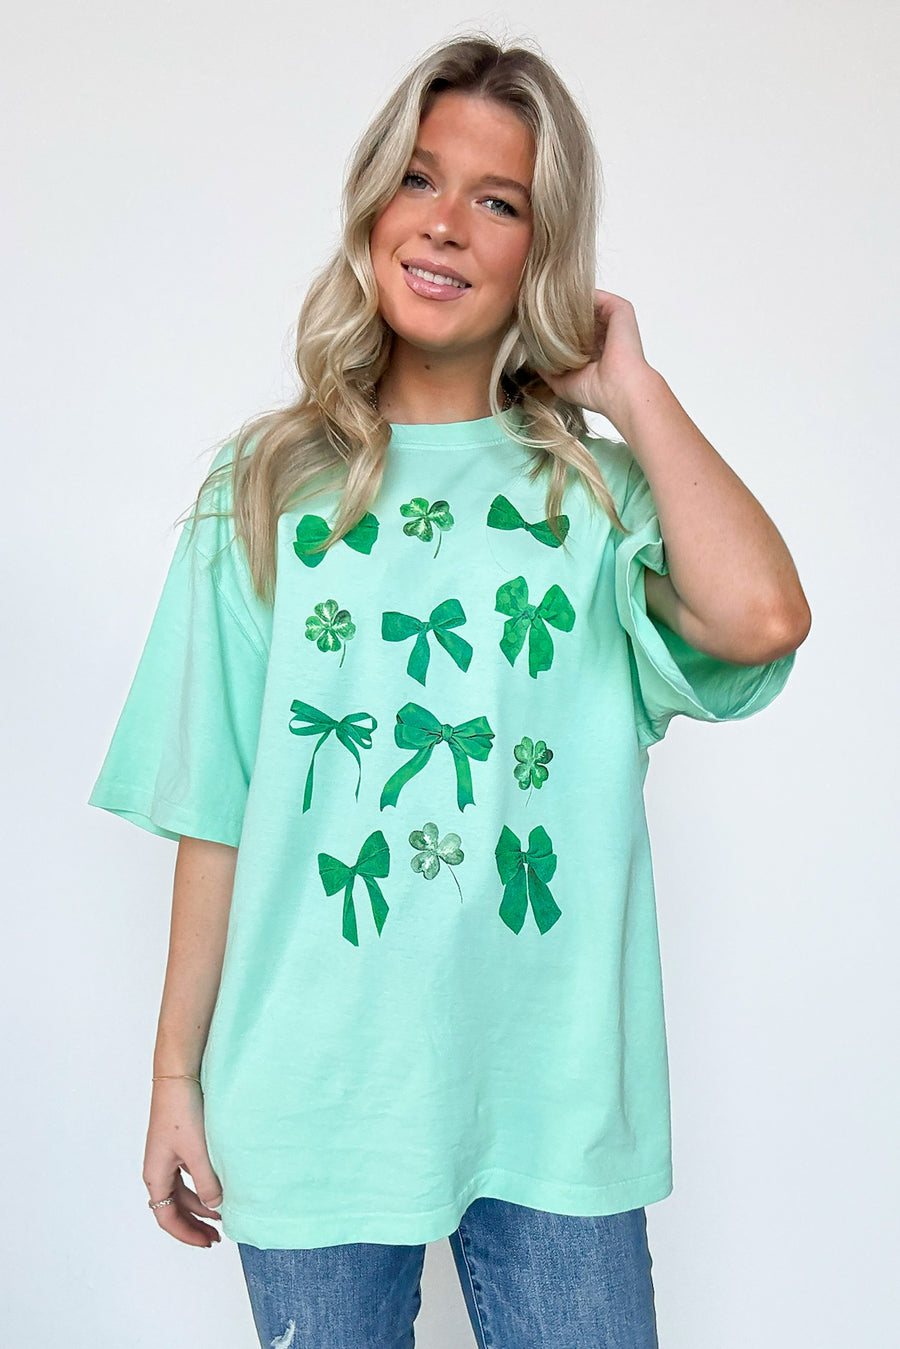  Luck of the Irish Bow Graphic Tee - Madison and Mallory